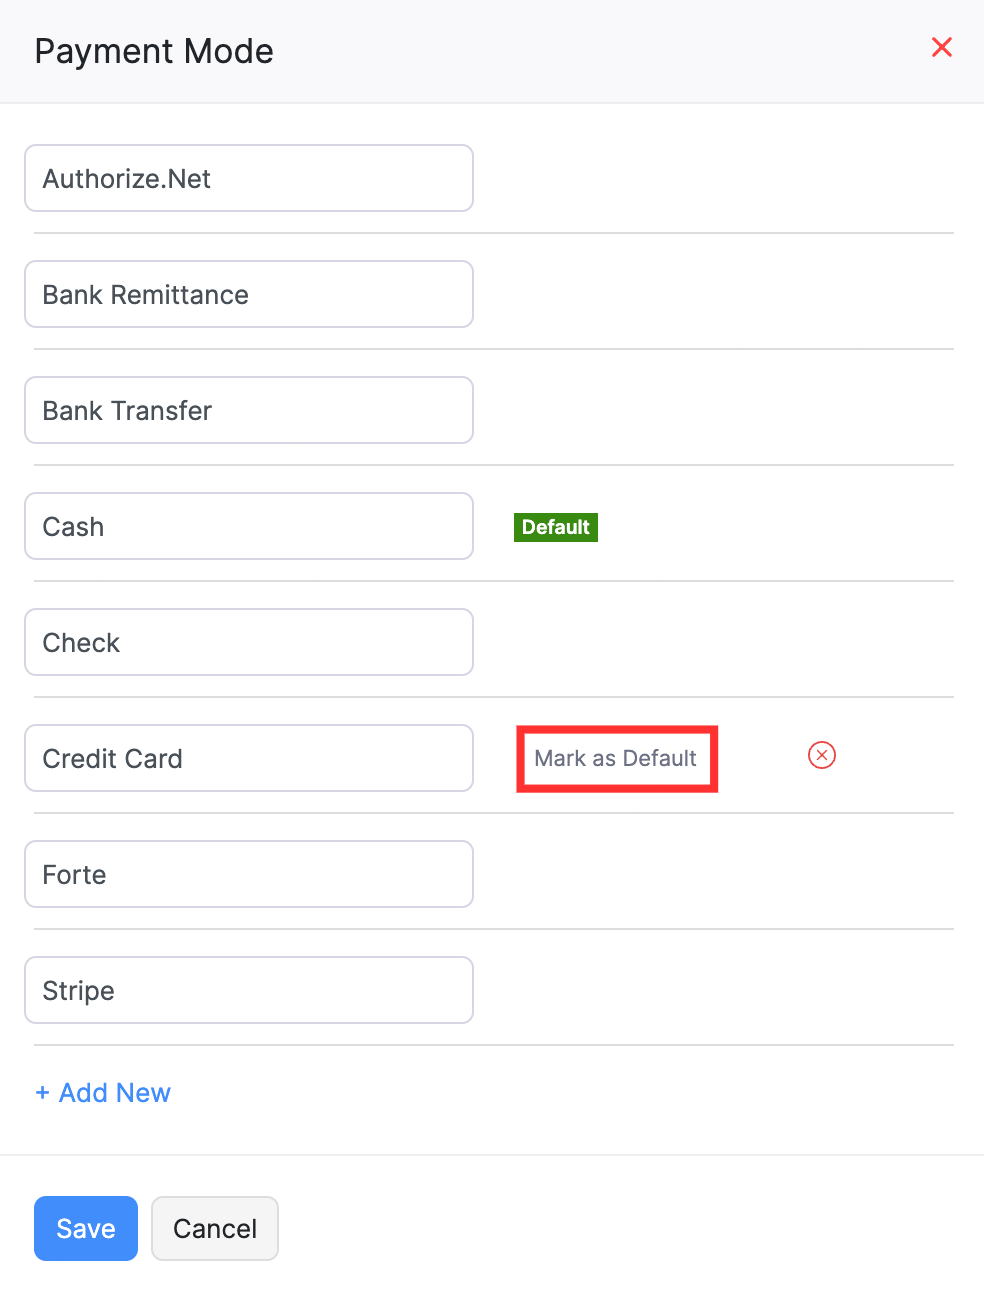 Click 'Mark as Default' next to the preferred payment mode